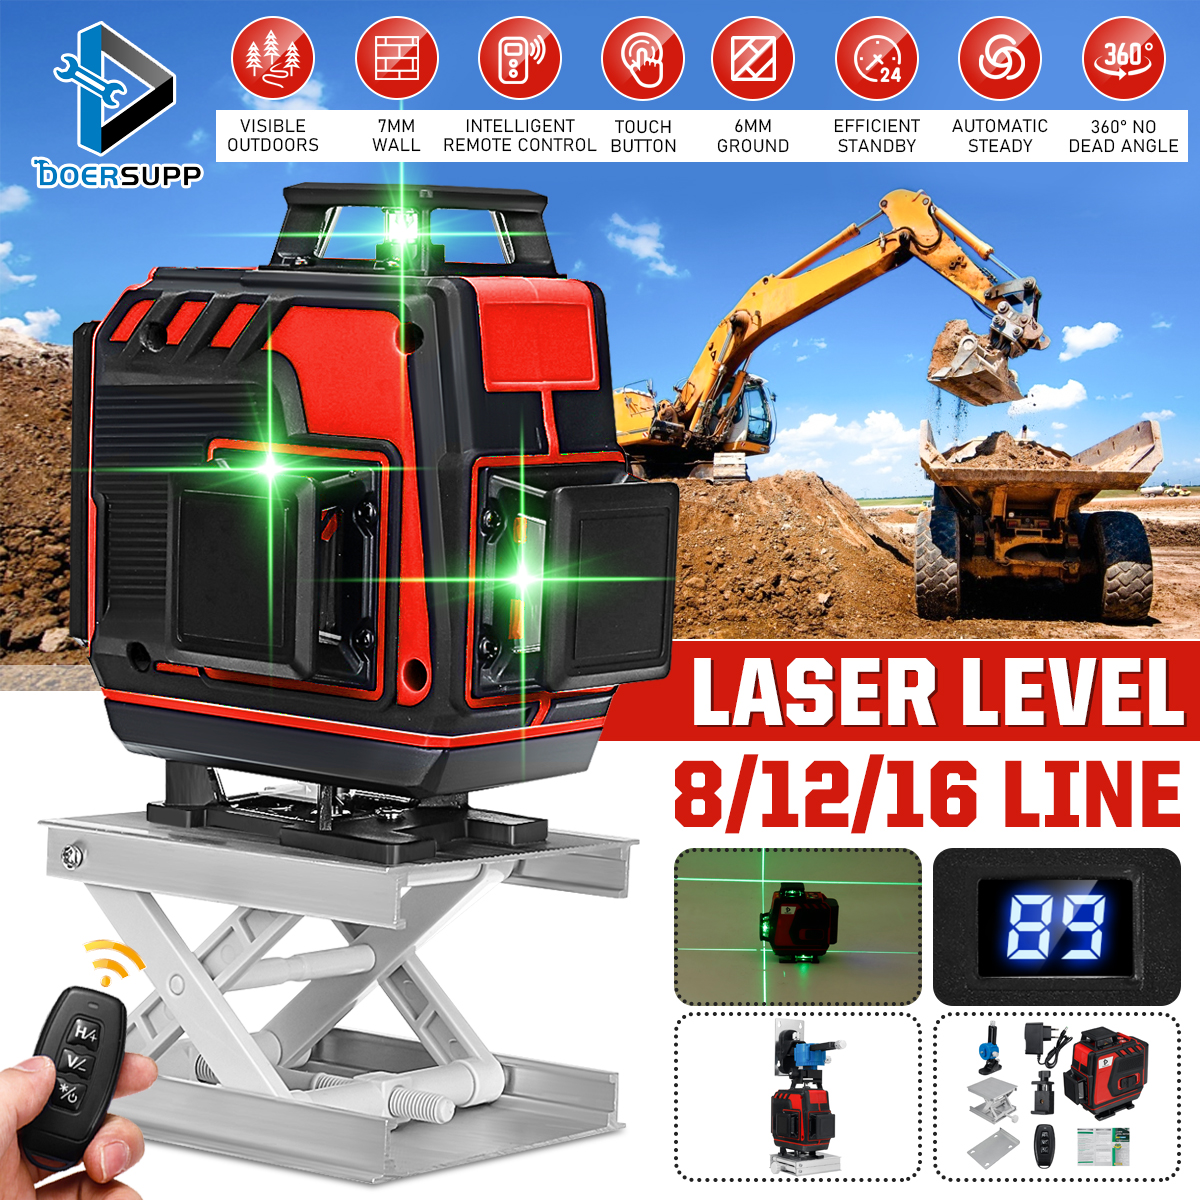 Laser-Level-With-Green-Light-Digital-Rotary-Self-Leveling-Measure-81216-Line-1825070-2